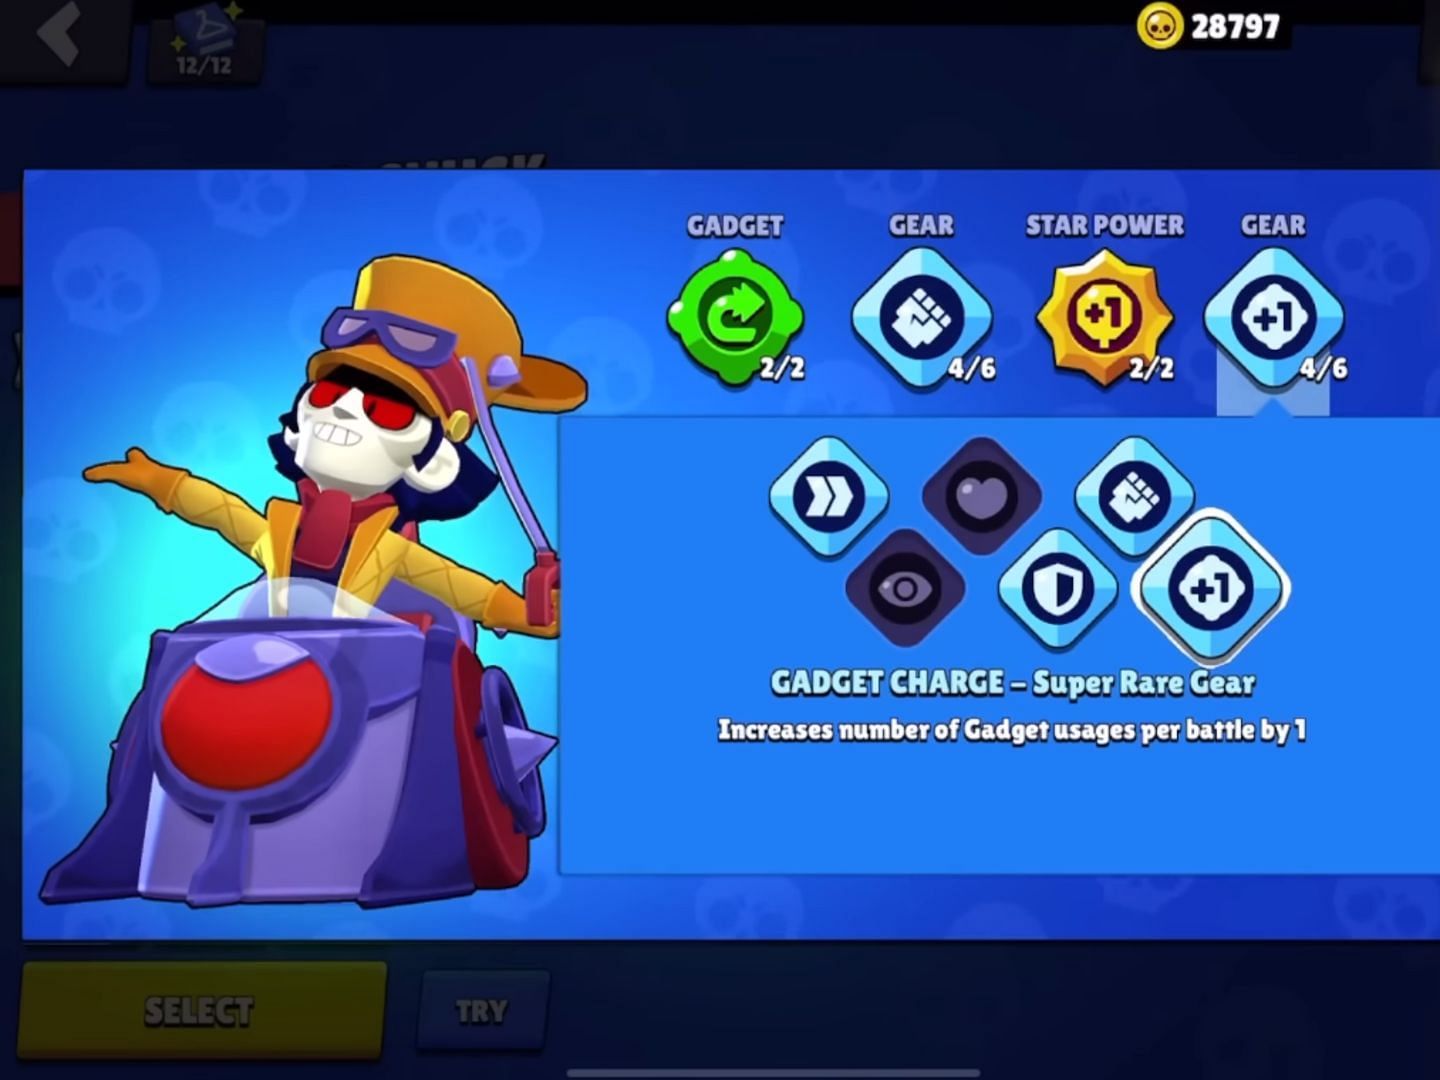 Gadget Charge Gear (Image via Supercell)